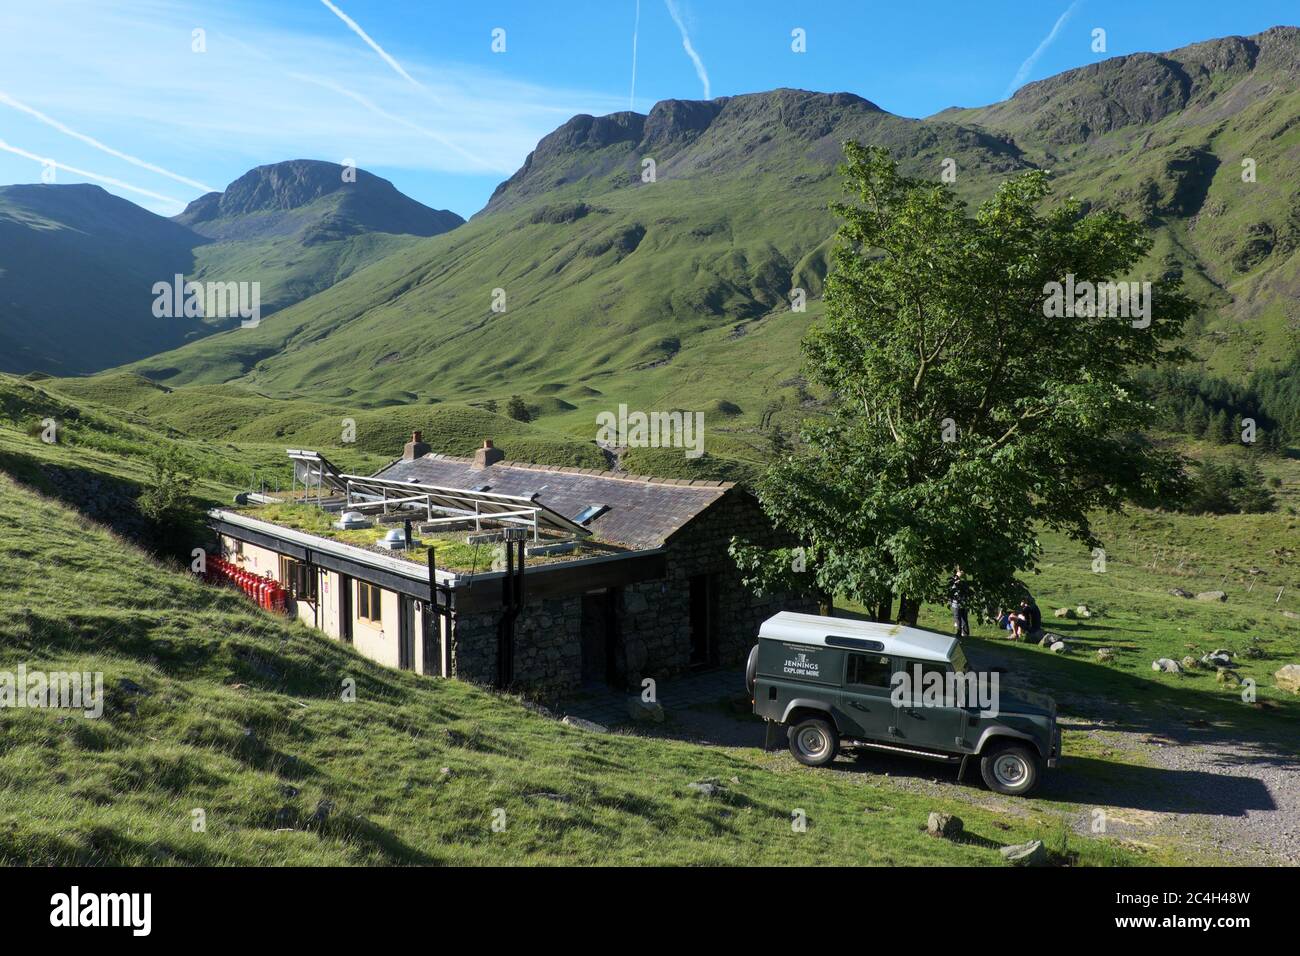 Black Sail Hut, one of the remotest youth hostels in England, close to the head of Ennerdale in the Lake District National Park Stock Photo